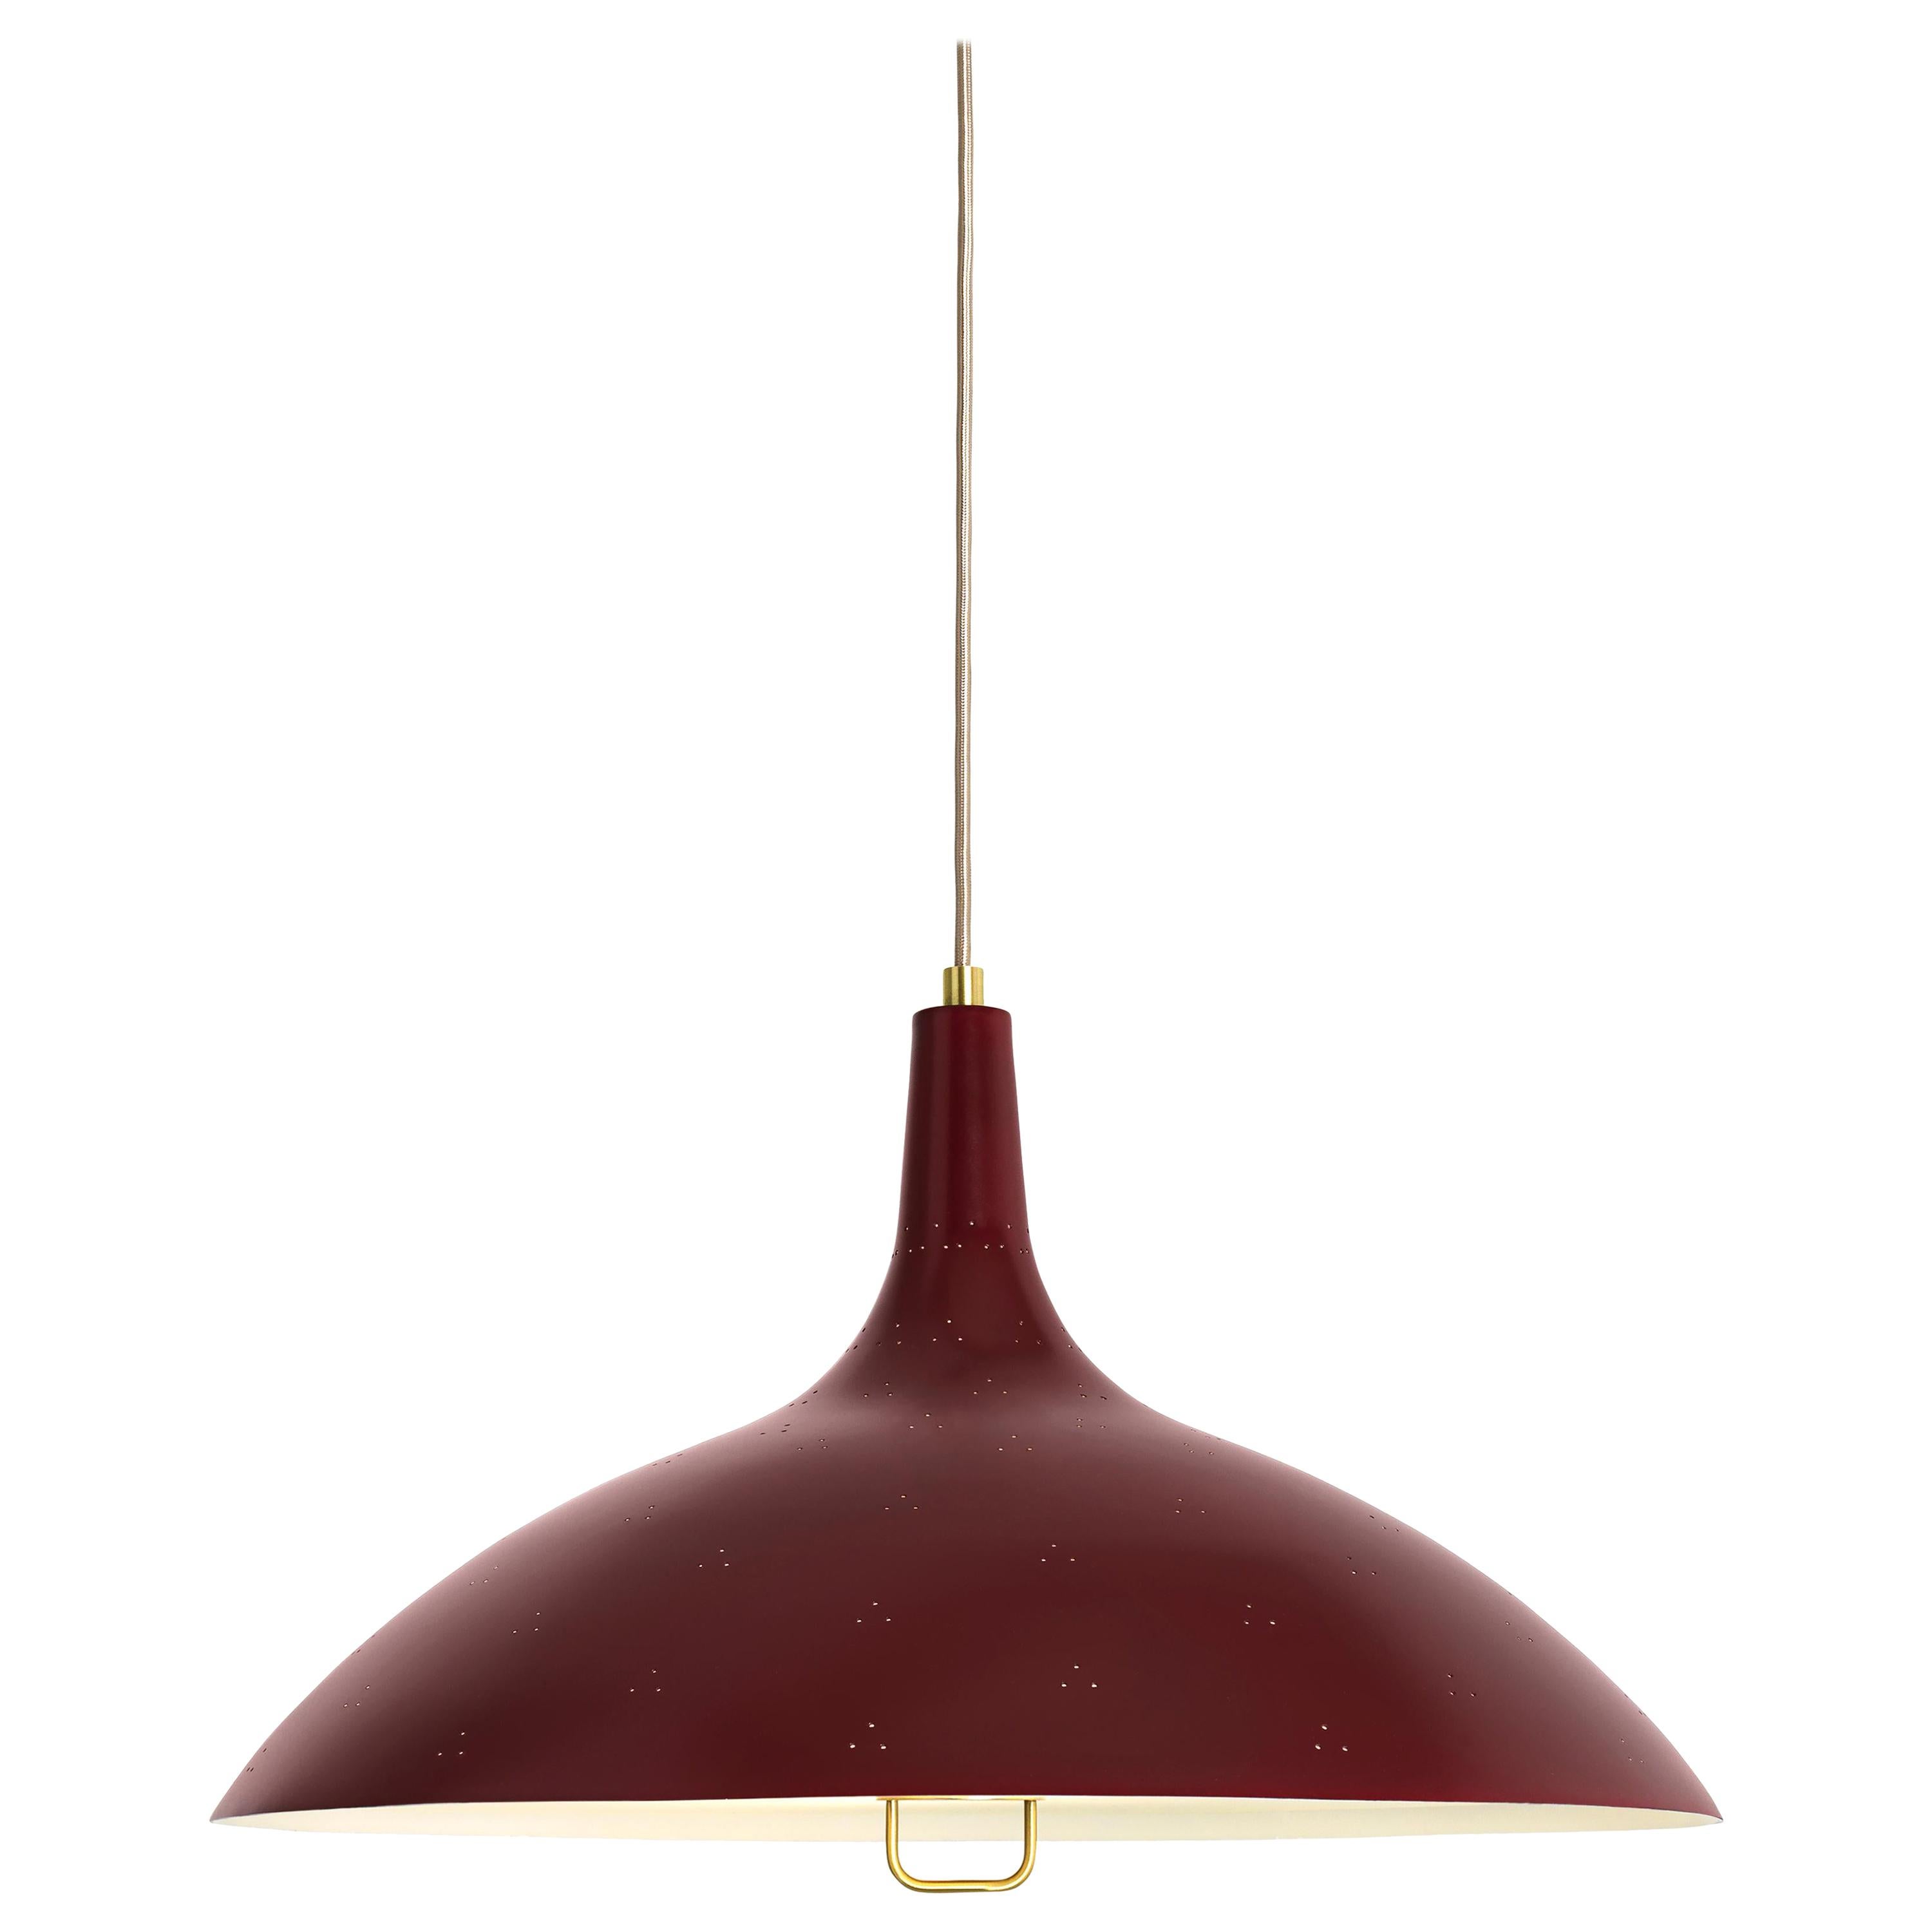 Paavo Tynell '1965' pendant lamp in red. Originally designed by Paavo Tynell in 1947, this authorized GUBI re-edition is executed in a perforated brass metal shade with white interior and glass diffuser. Like many of his iconic designs, the pendant